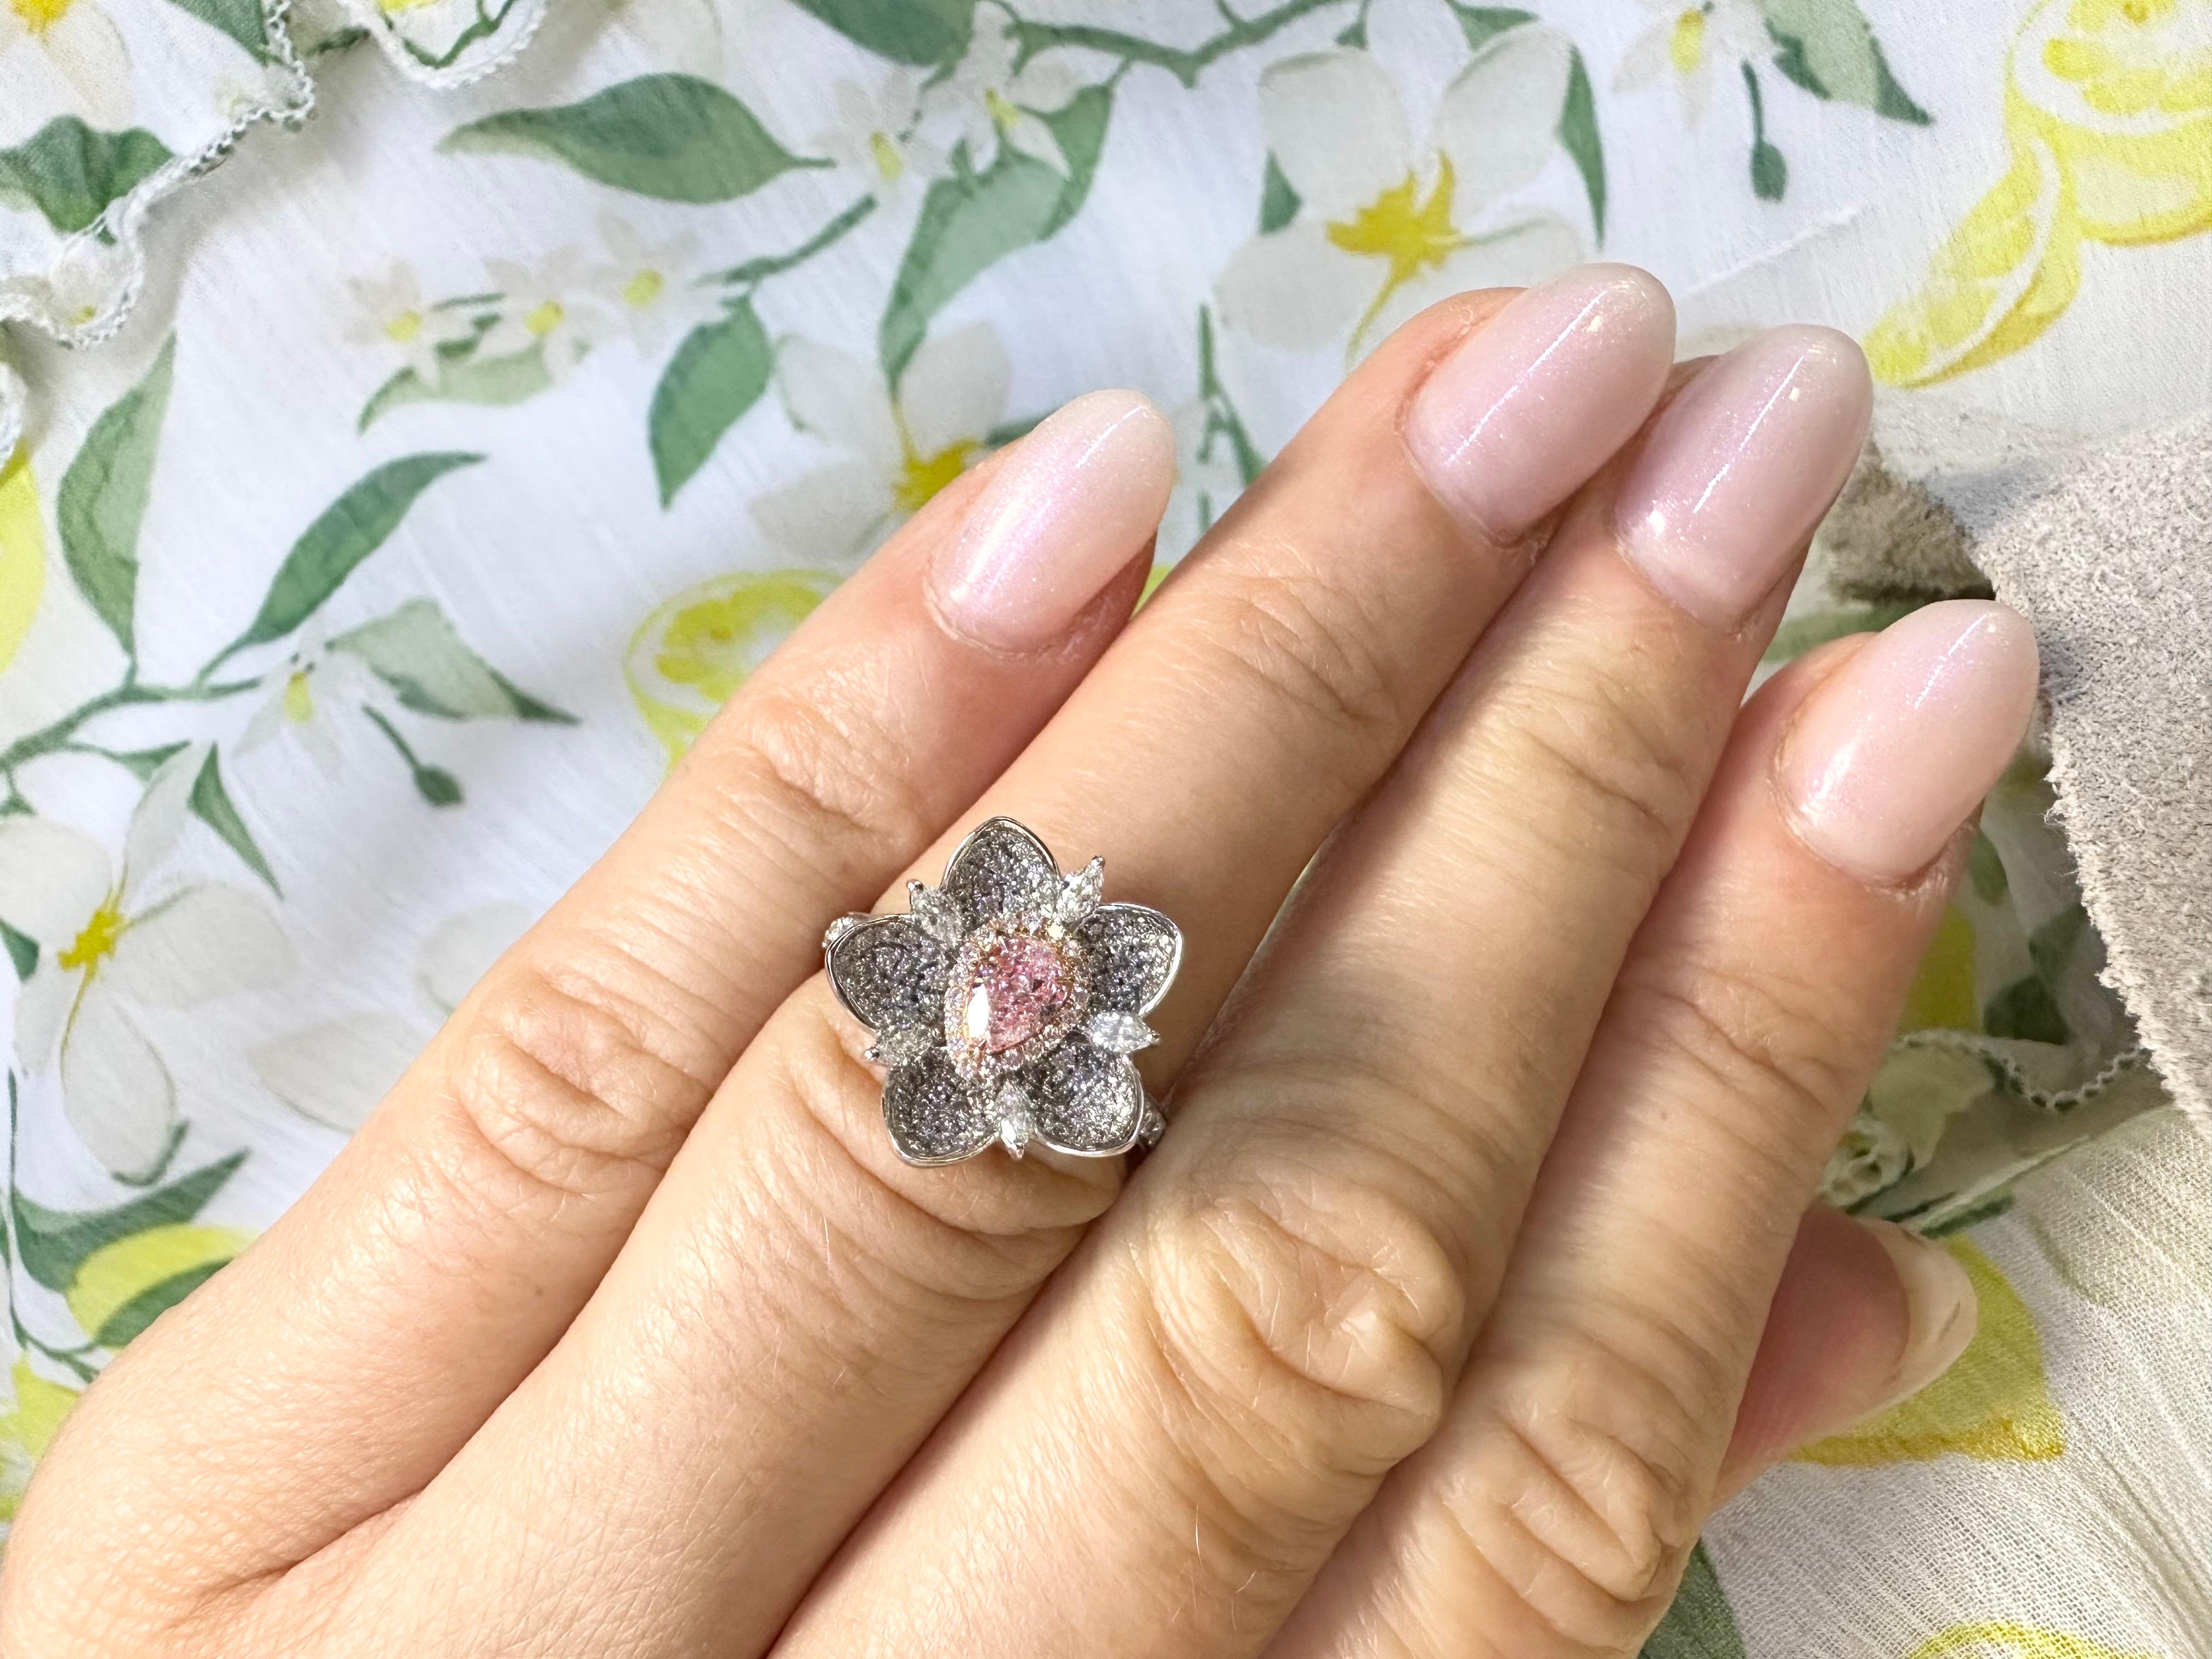 Stunning Floral cocktail ring made with GIA certified pink diamond in center and small diamonds all around, this lotus has unbelievable sparkle!

Metal Type: 18KT
Gram Weight:5.77 grams 

Natural Pink diamond(s):
Color: Faint Pink
Cut:Pear